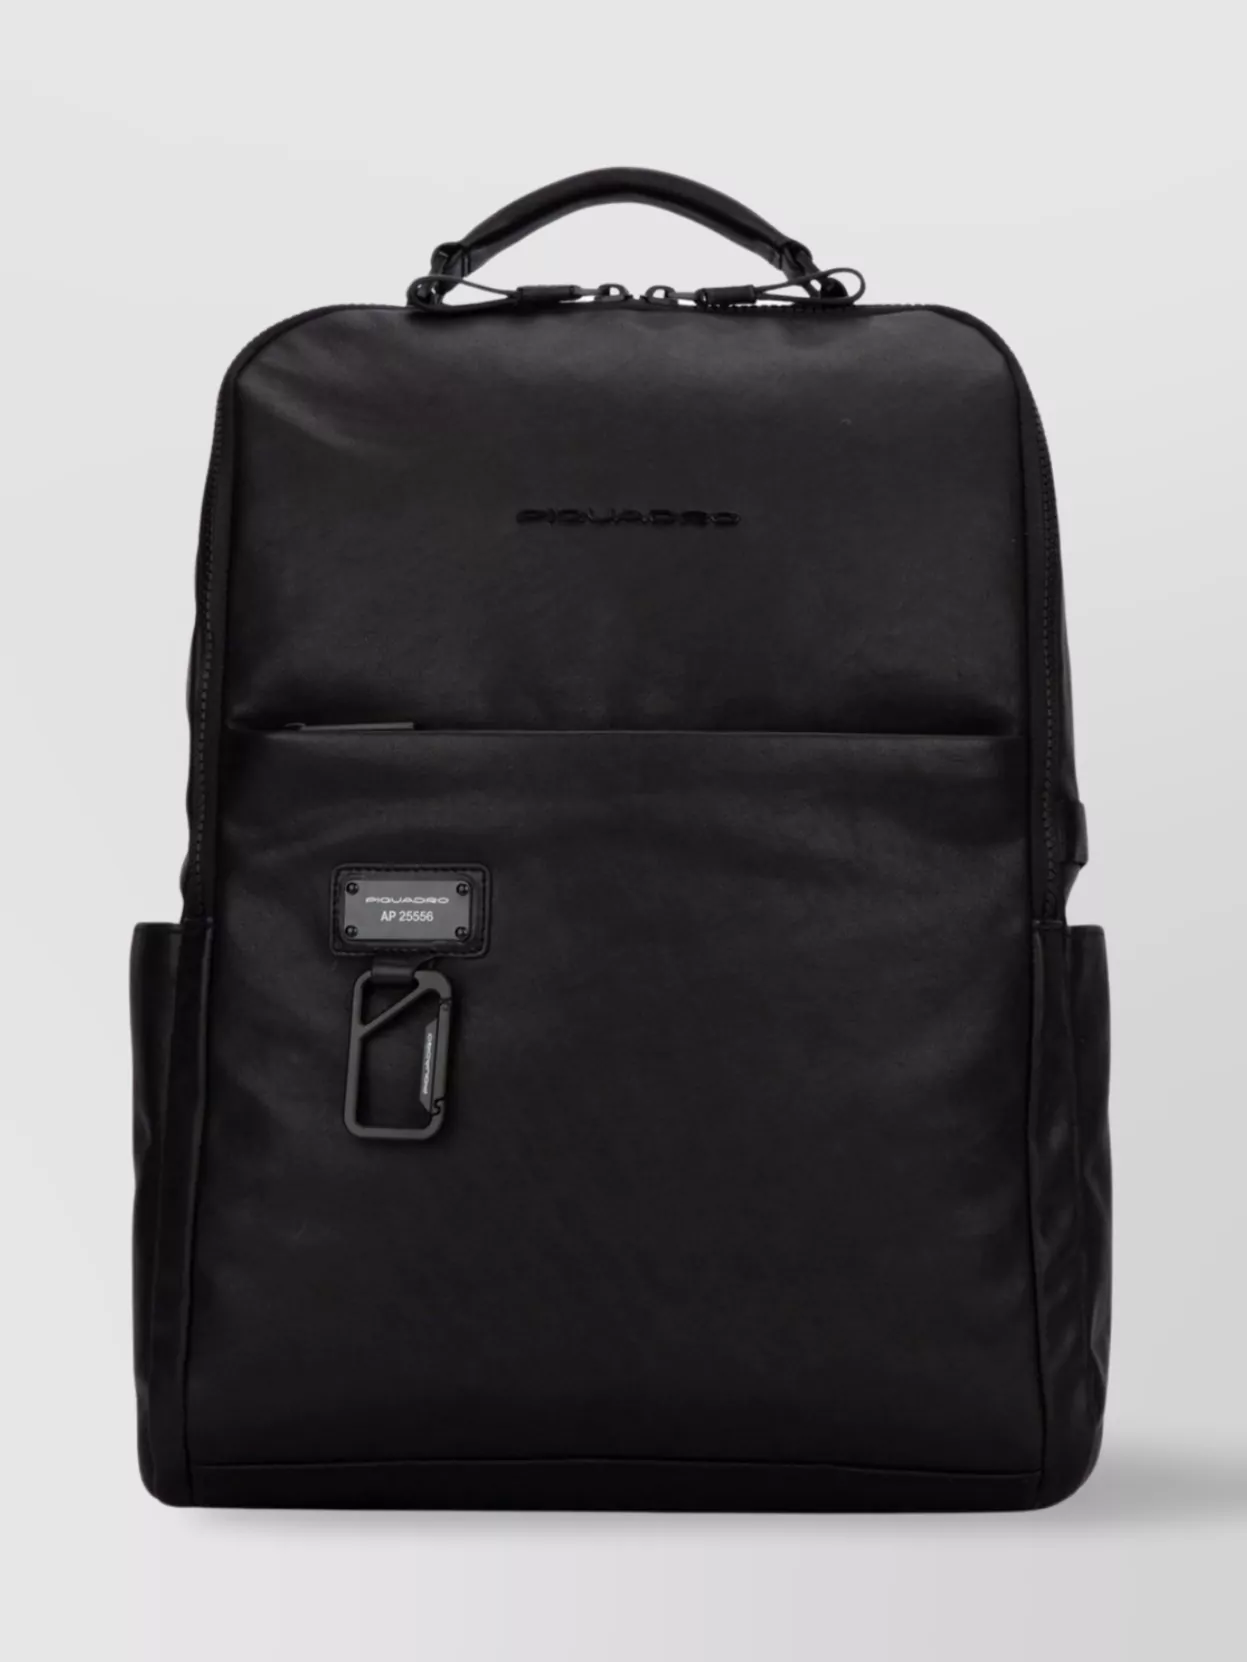 Shop Piquadro Backpack With Adjustable Straps And External Pocket